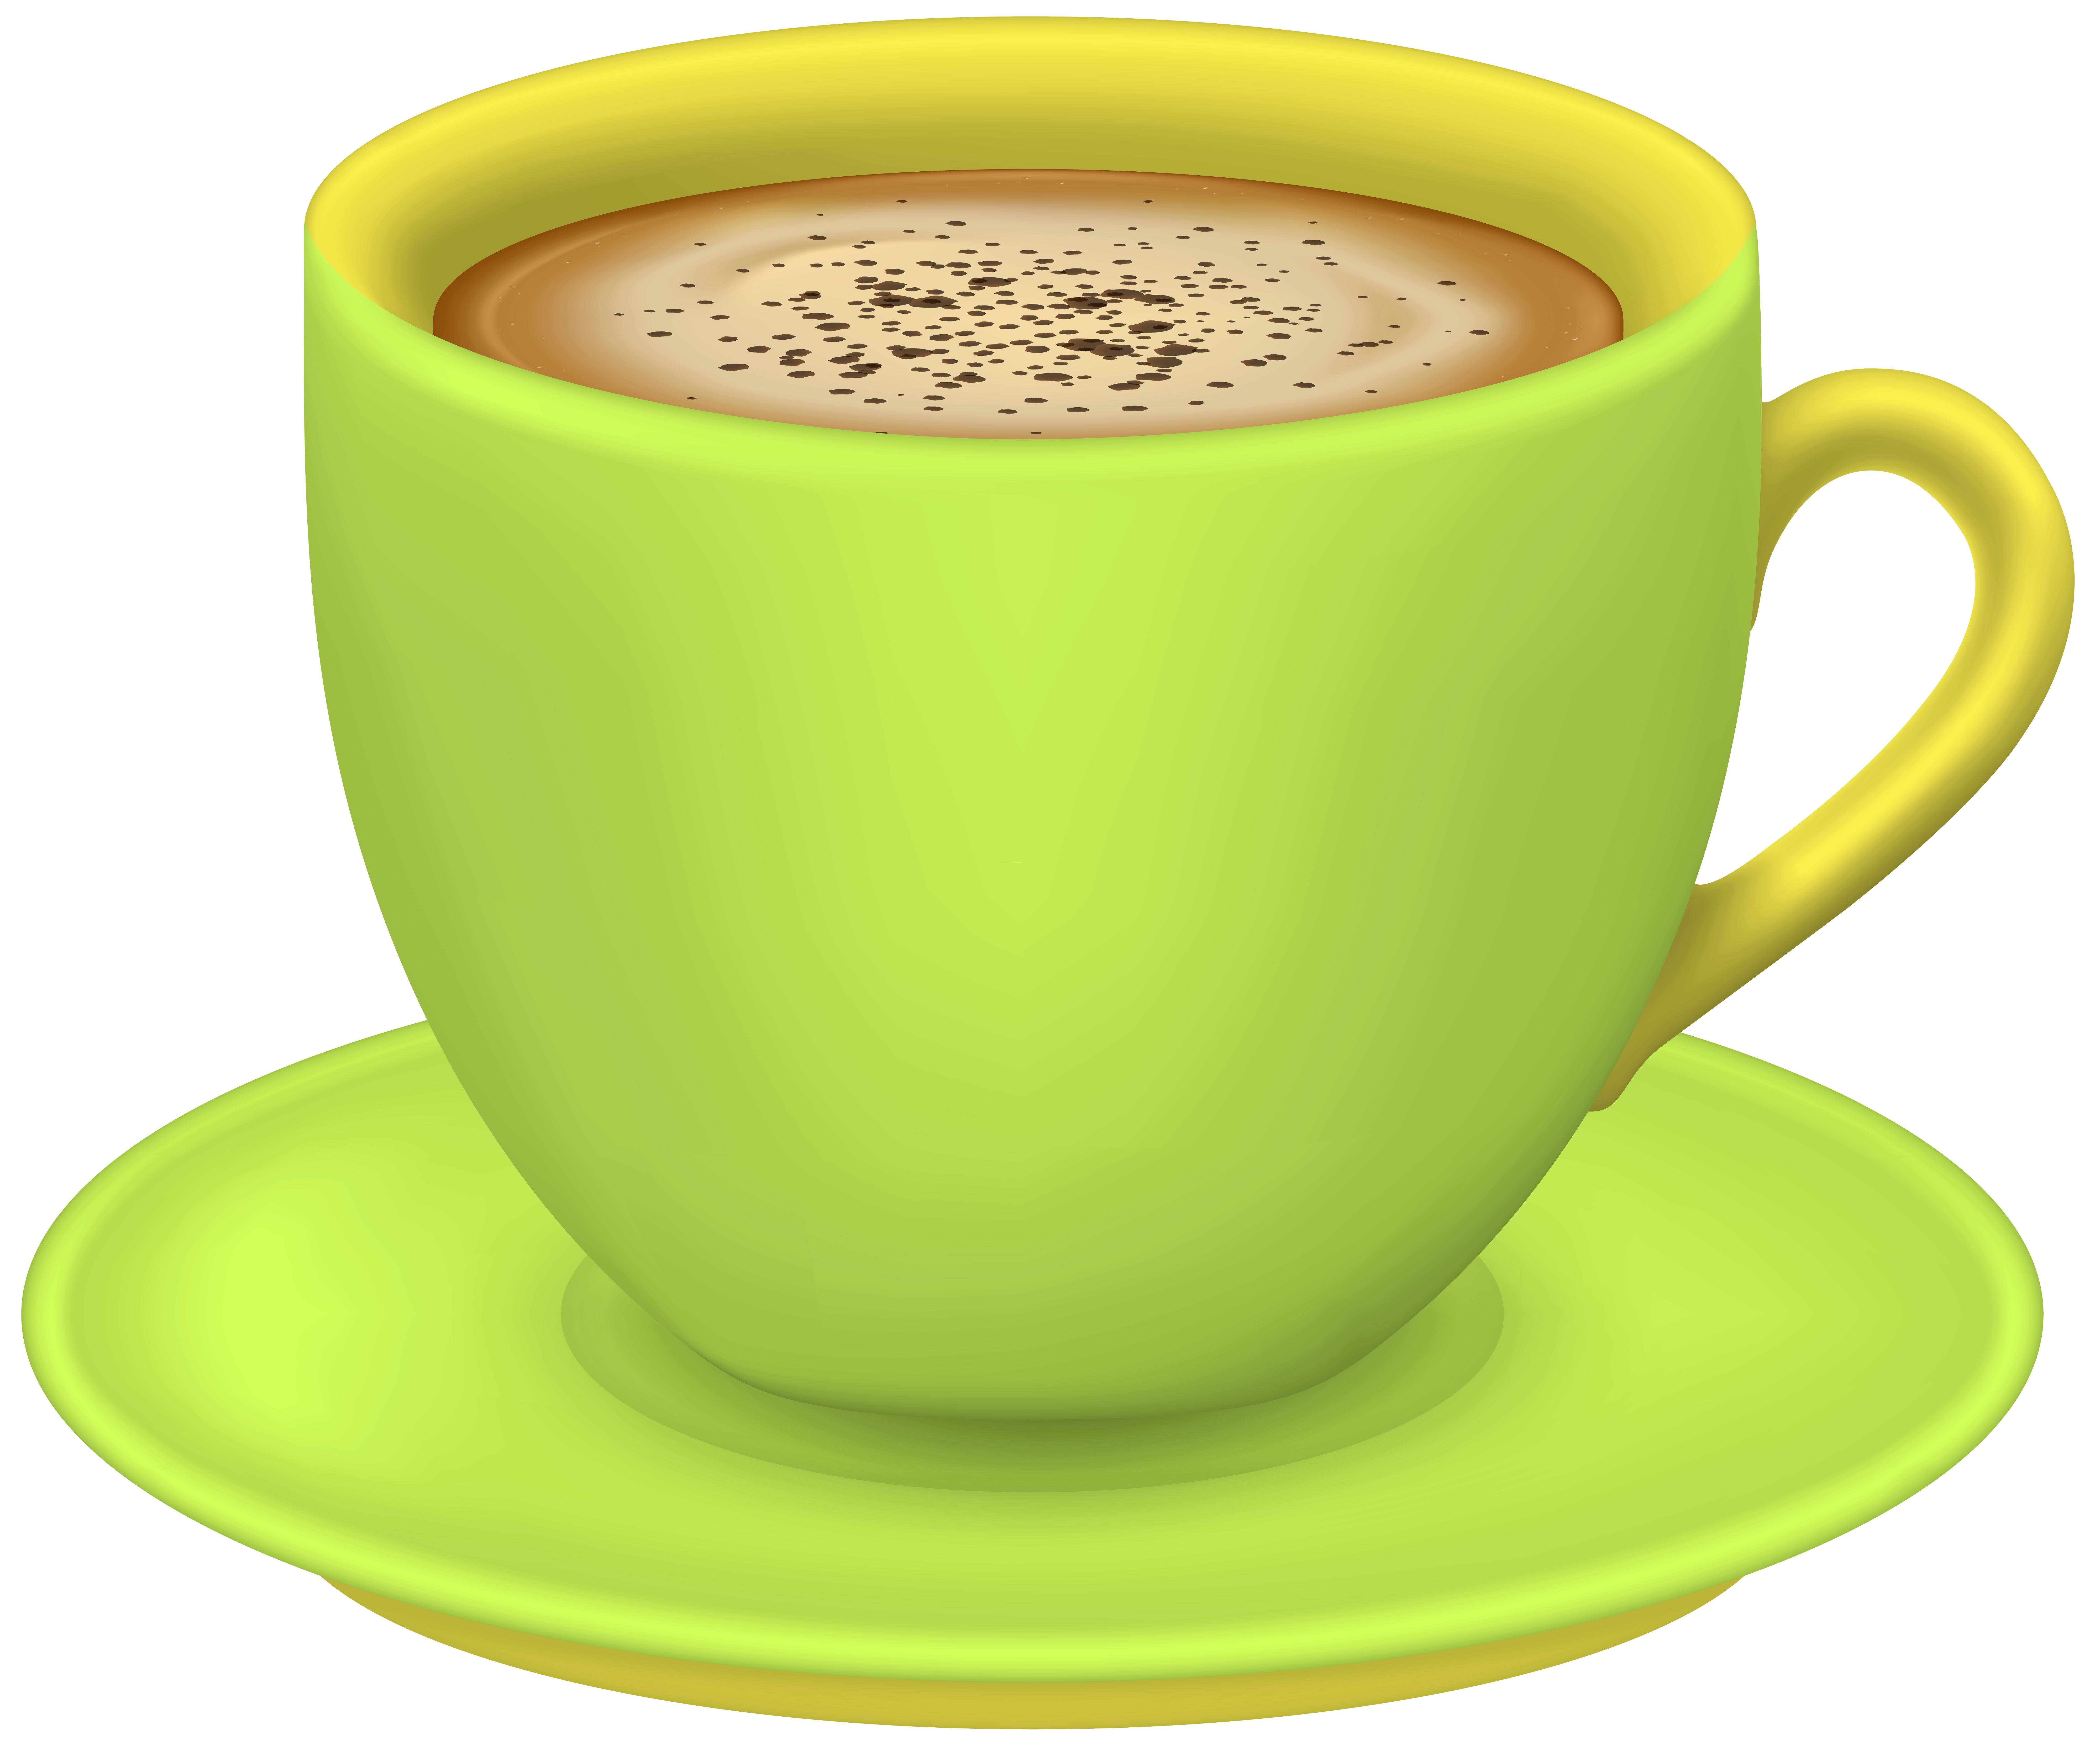 https://gallery.yopriceville.com/var/albums/Free-Clipart-Pictures/Coffee-PNG/Green_Yellow_Cup_of_Coffee_PNG_Clipart.png?m=1623834689